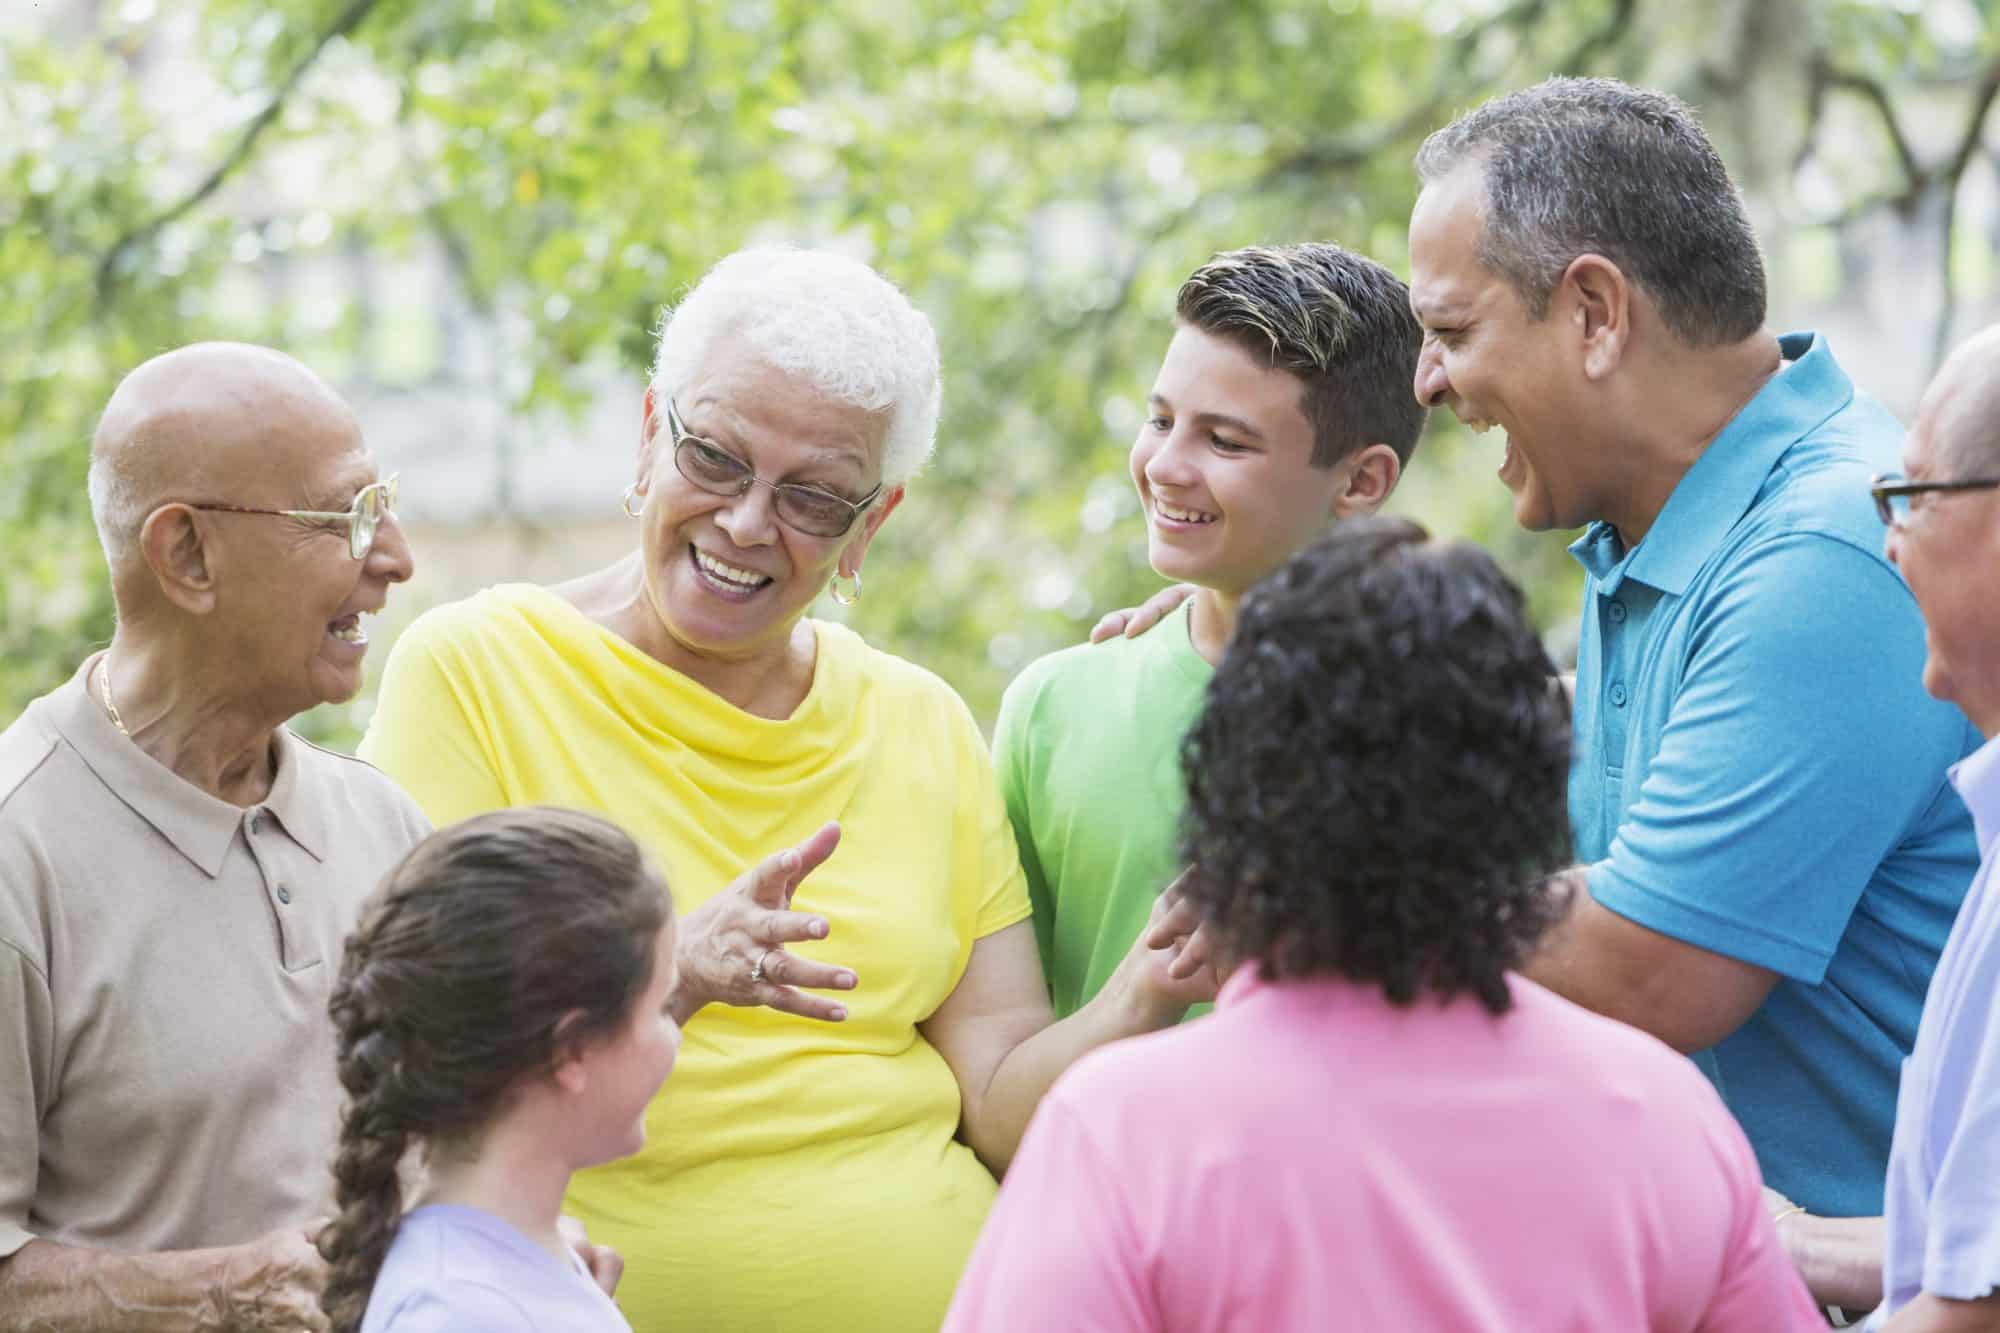 BC Healthy Communities newly administers the Age-friendly Communities Grant Program